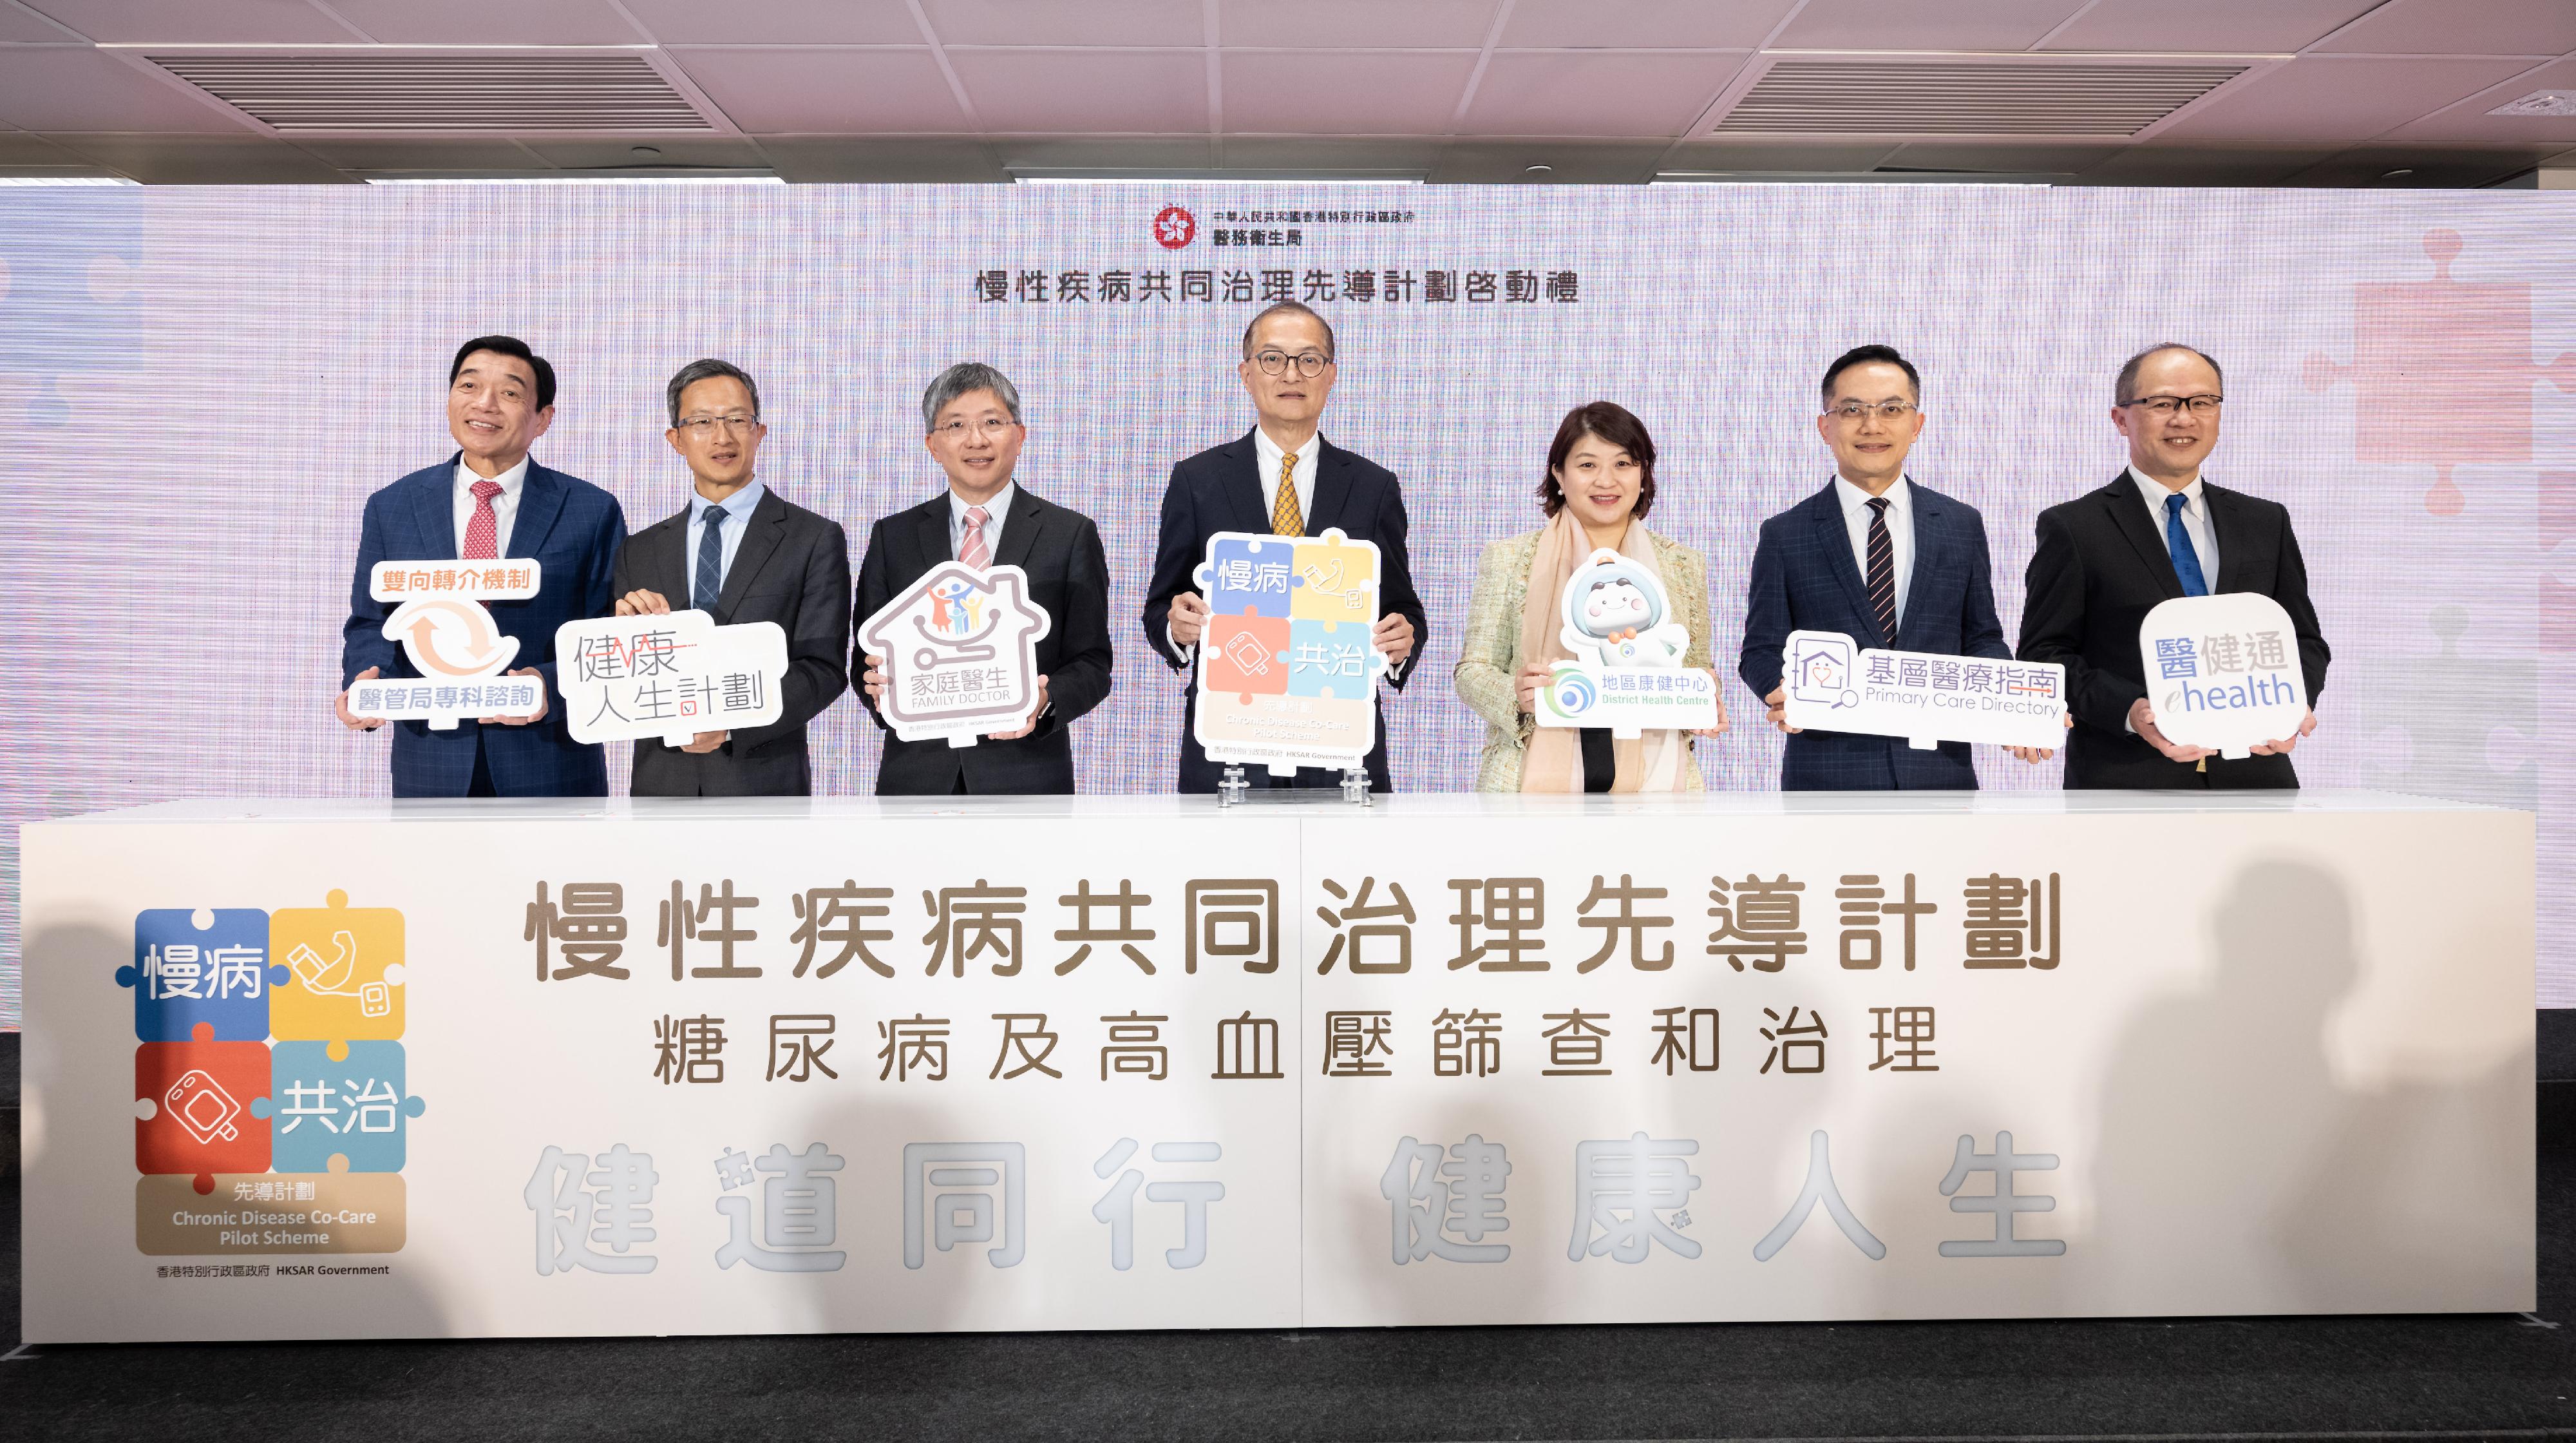 The Secretary for Health, Professor Lo Chung-mau (centre); Legislative Councillor Dr David Lam (second left); the Permanent Secretary for Health, Mr Thomas Chan (third left); the Under Secretary for Health, Dr Libby Lee (third right); the Director of Health, Dr Ronald Lam (second right); the Chairman of the Hospital Authority, Mr Henry Fan (first left); and the President of the Hong Kong College of Family Physicians, Dr David Chao (first right), officiate at the kick-off ceremony of the Chronic Disease Co-Care Pilot Scheme today (November 13), marking the official launch of the first major initiative set out in the Primary Healthcare Blueprint.